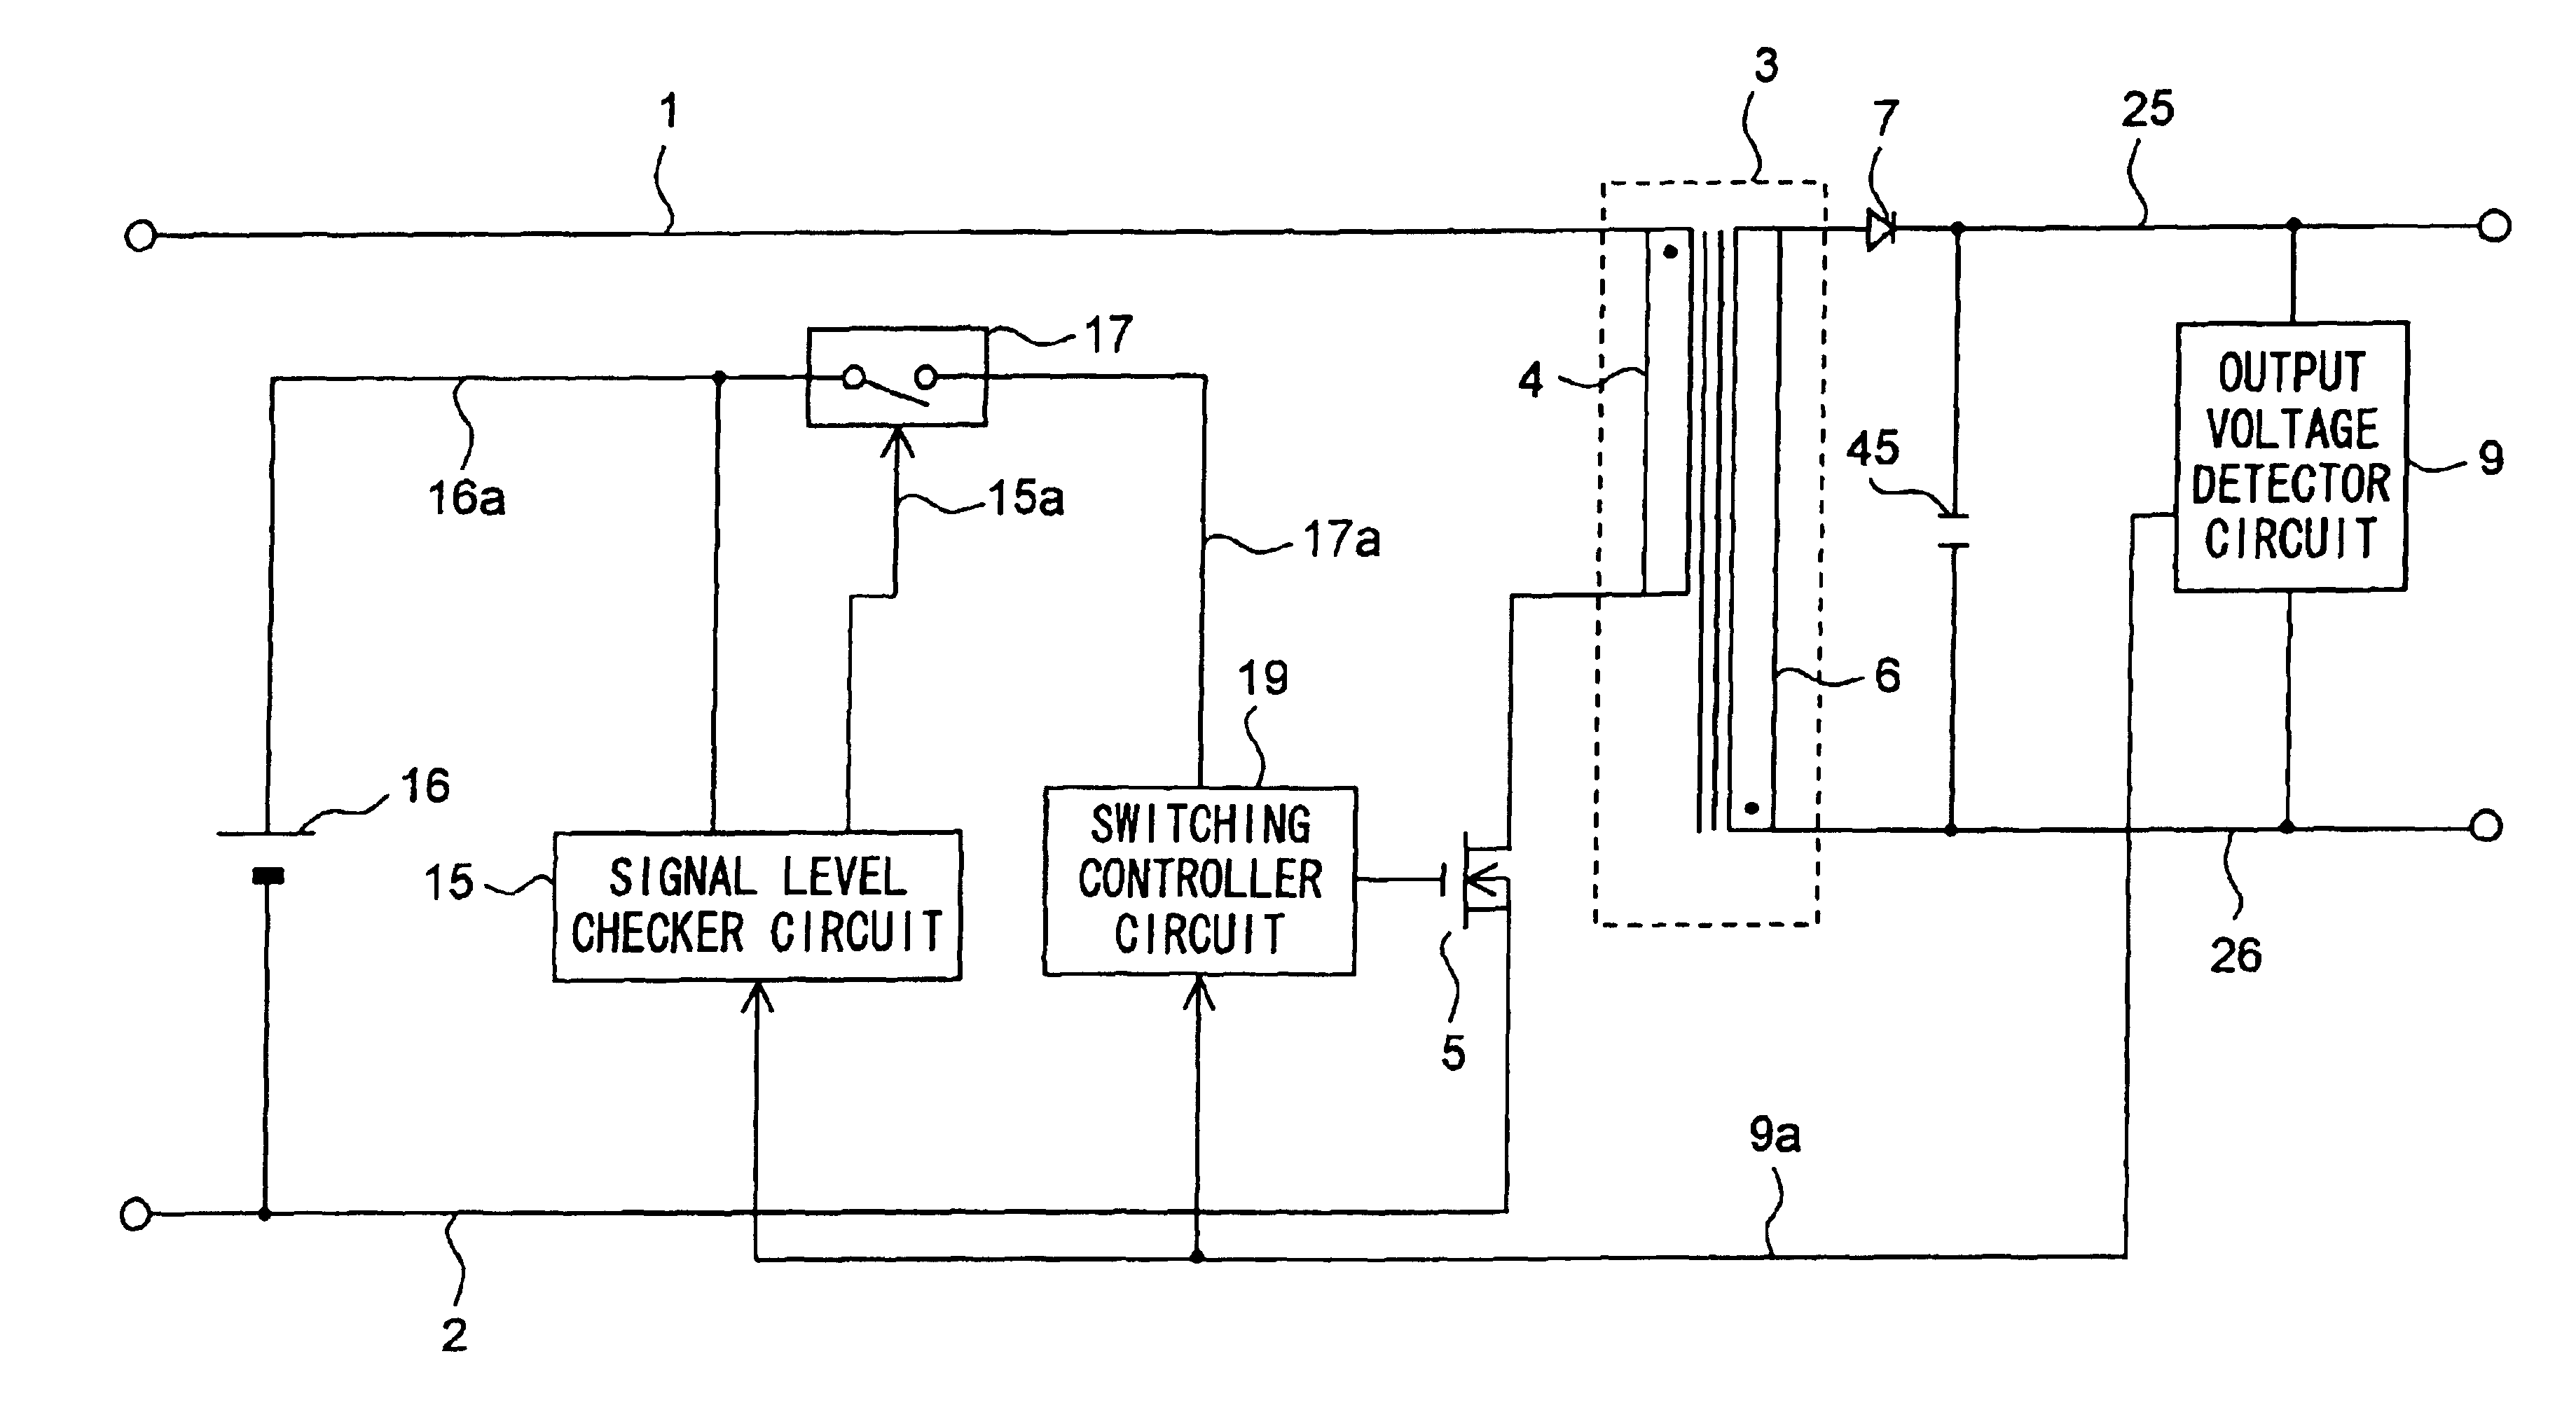 Switching power supply apparatus